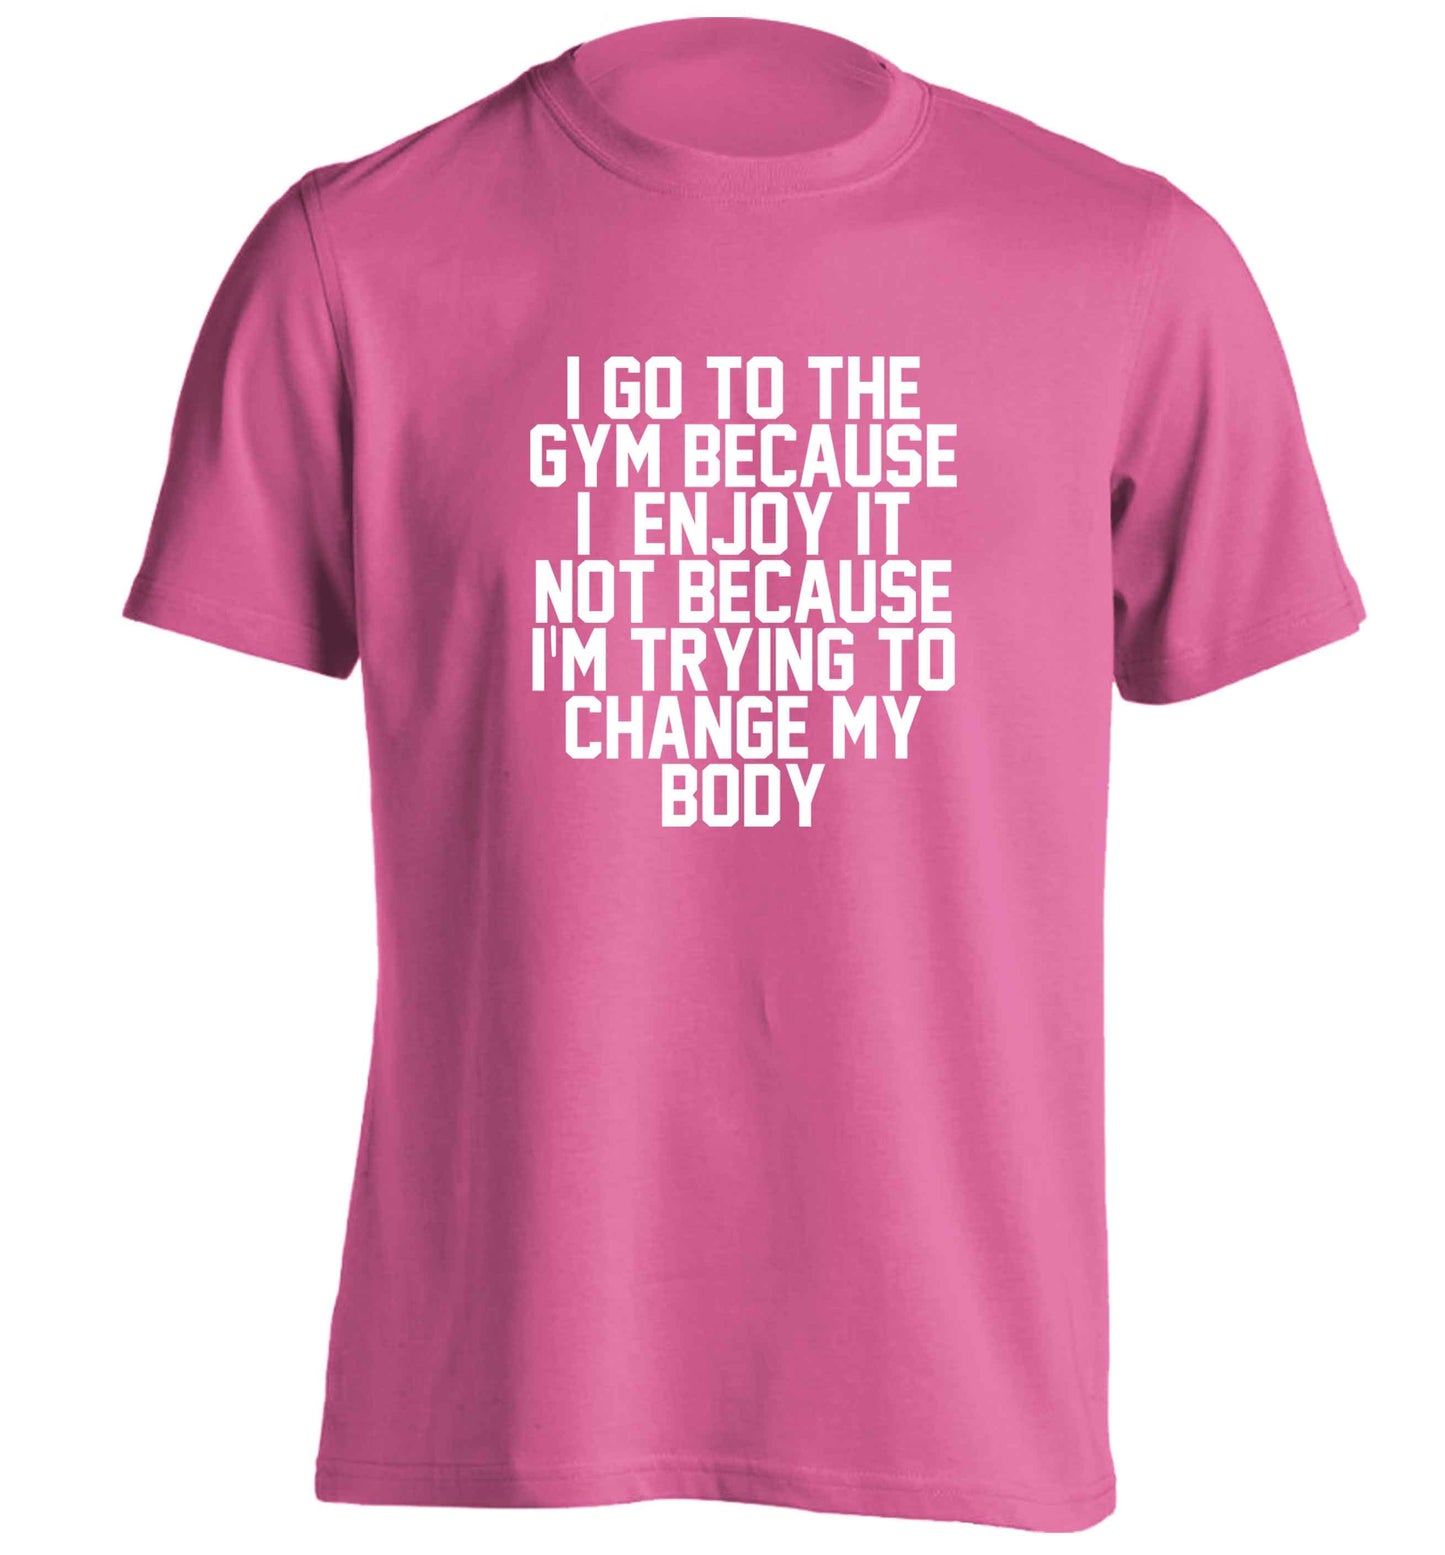 I go to the gym because I enjoy it not because I'm trying to change my body adults unisex pink Tshirt 2XL